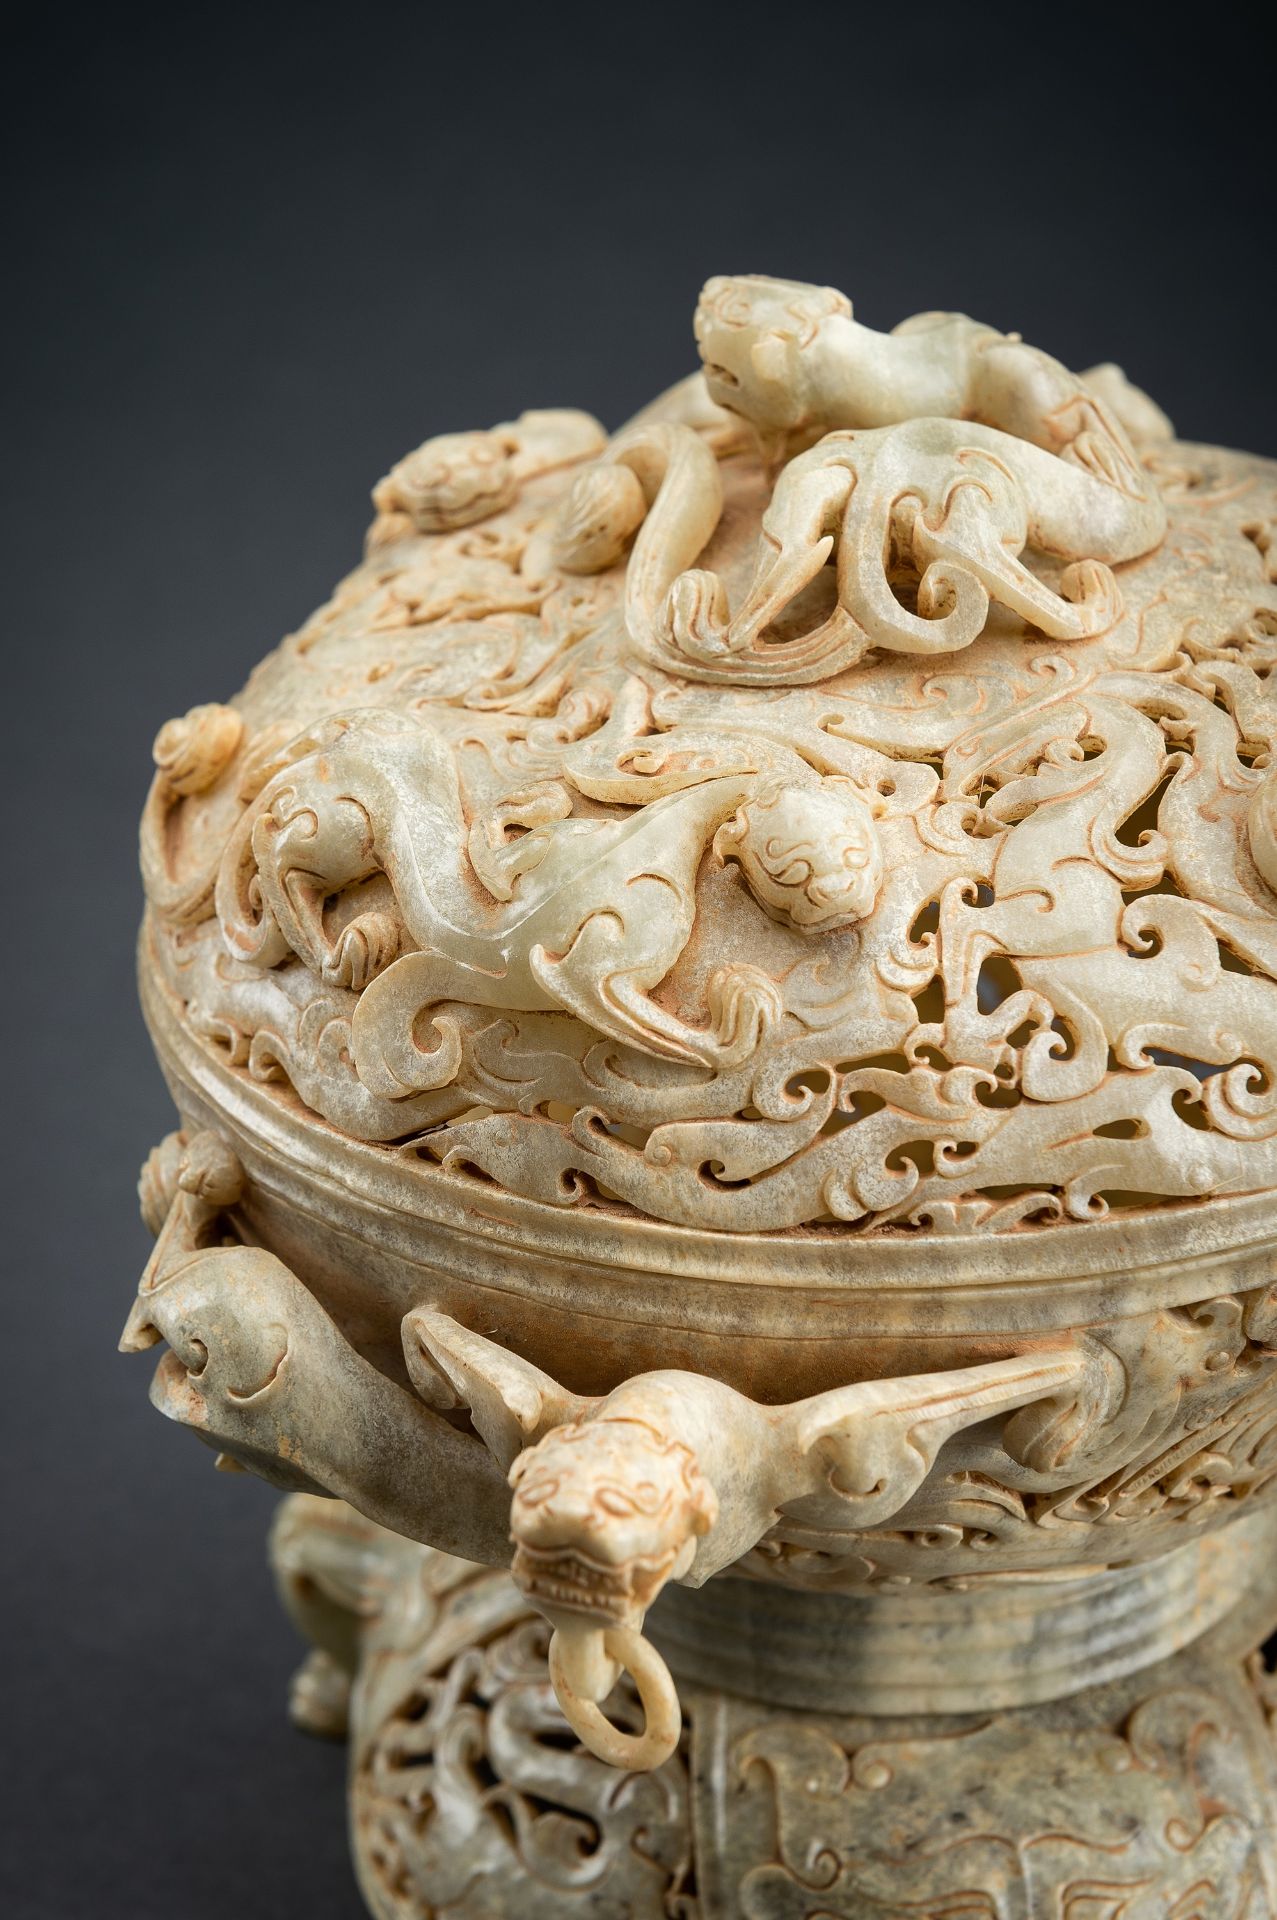 A LARGE AND IMPRESSIVE 3-PART RETICULATED CELADON JADE VESSEL